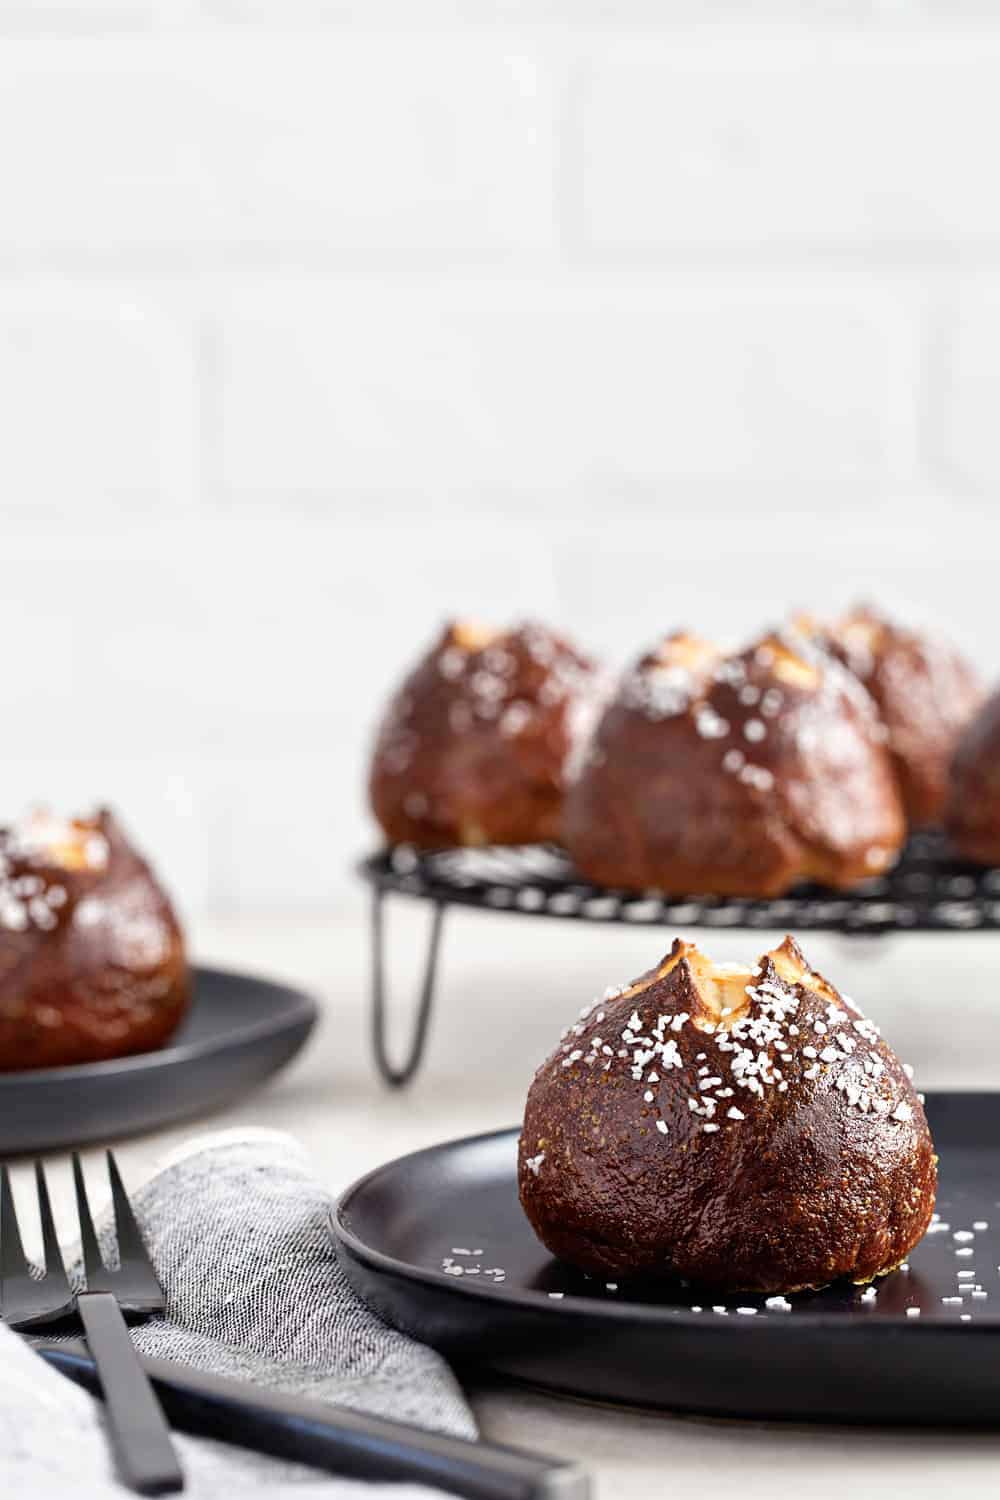 Steal the show with these delicious, fluffy Pretzel Rolls. Simple and delicious!